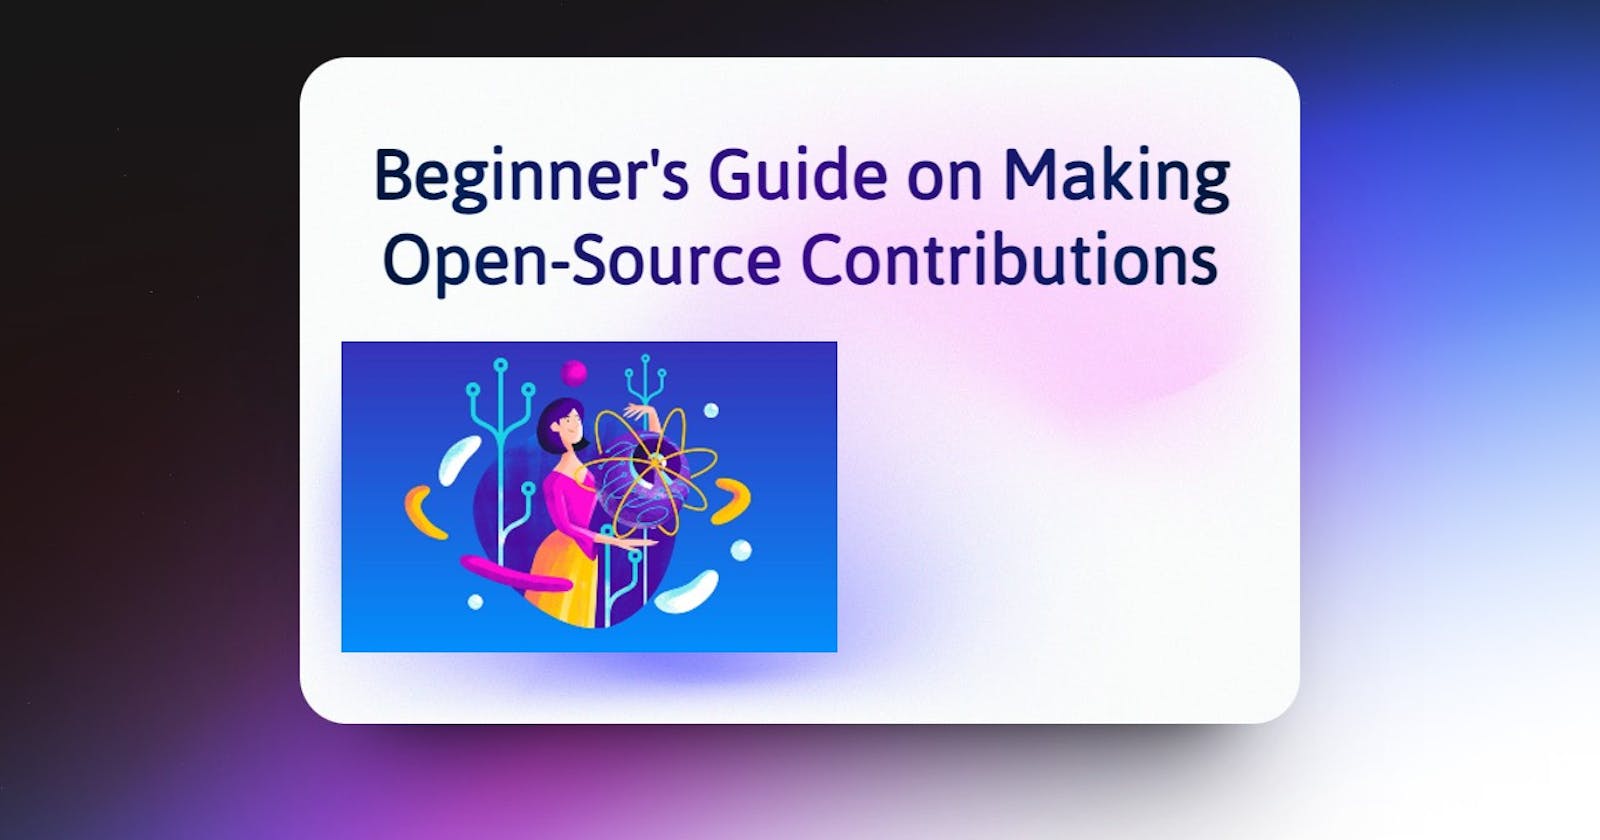 A Beginner's Guide for Open-Source Contributions